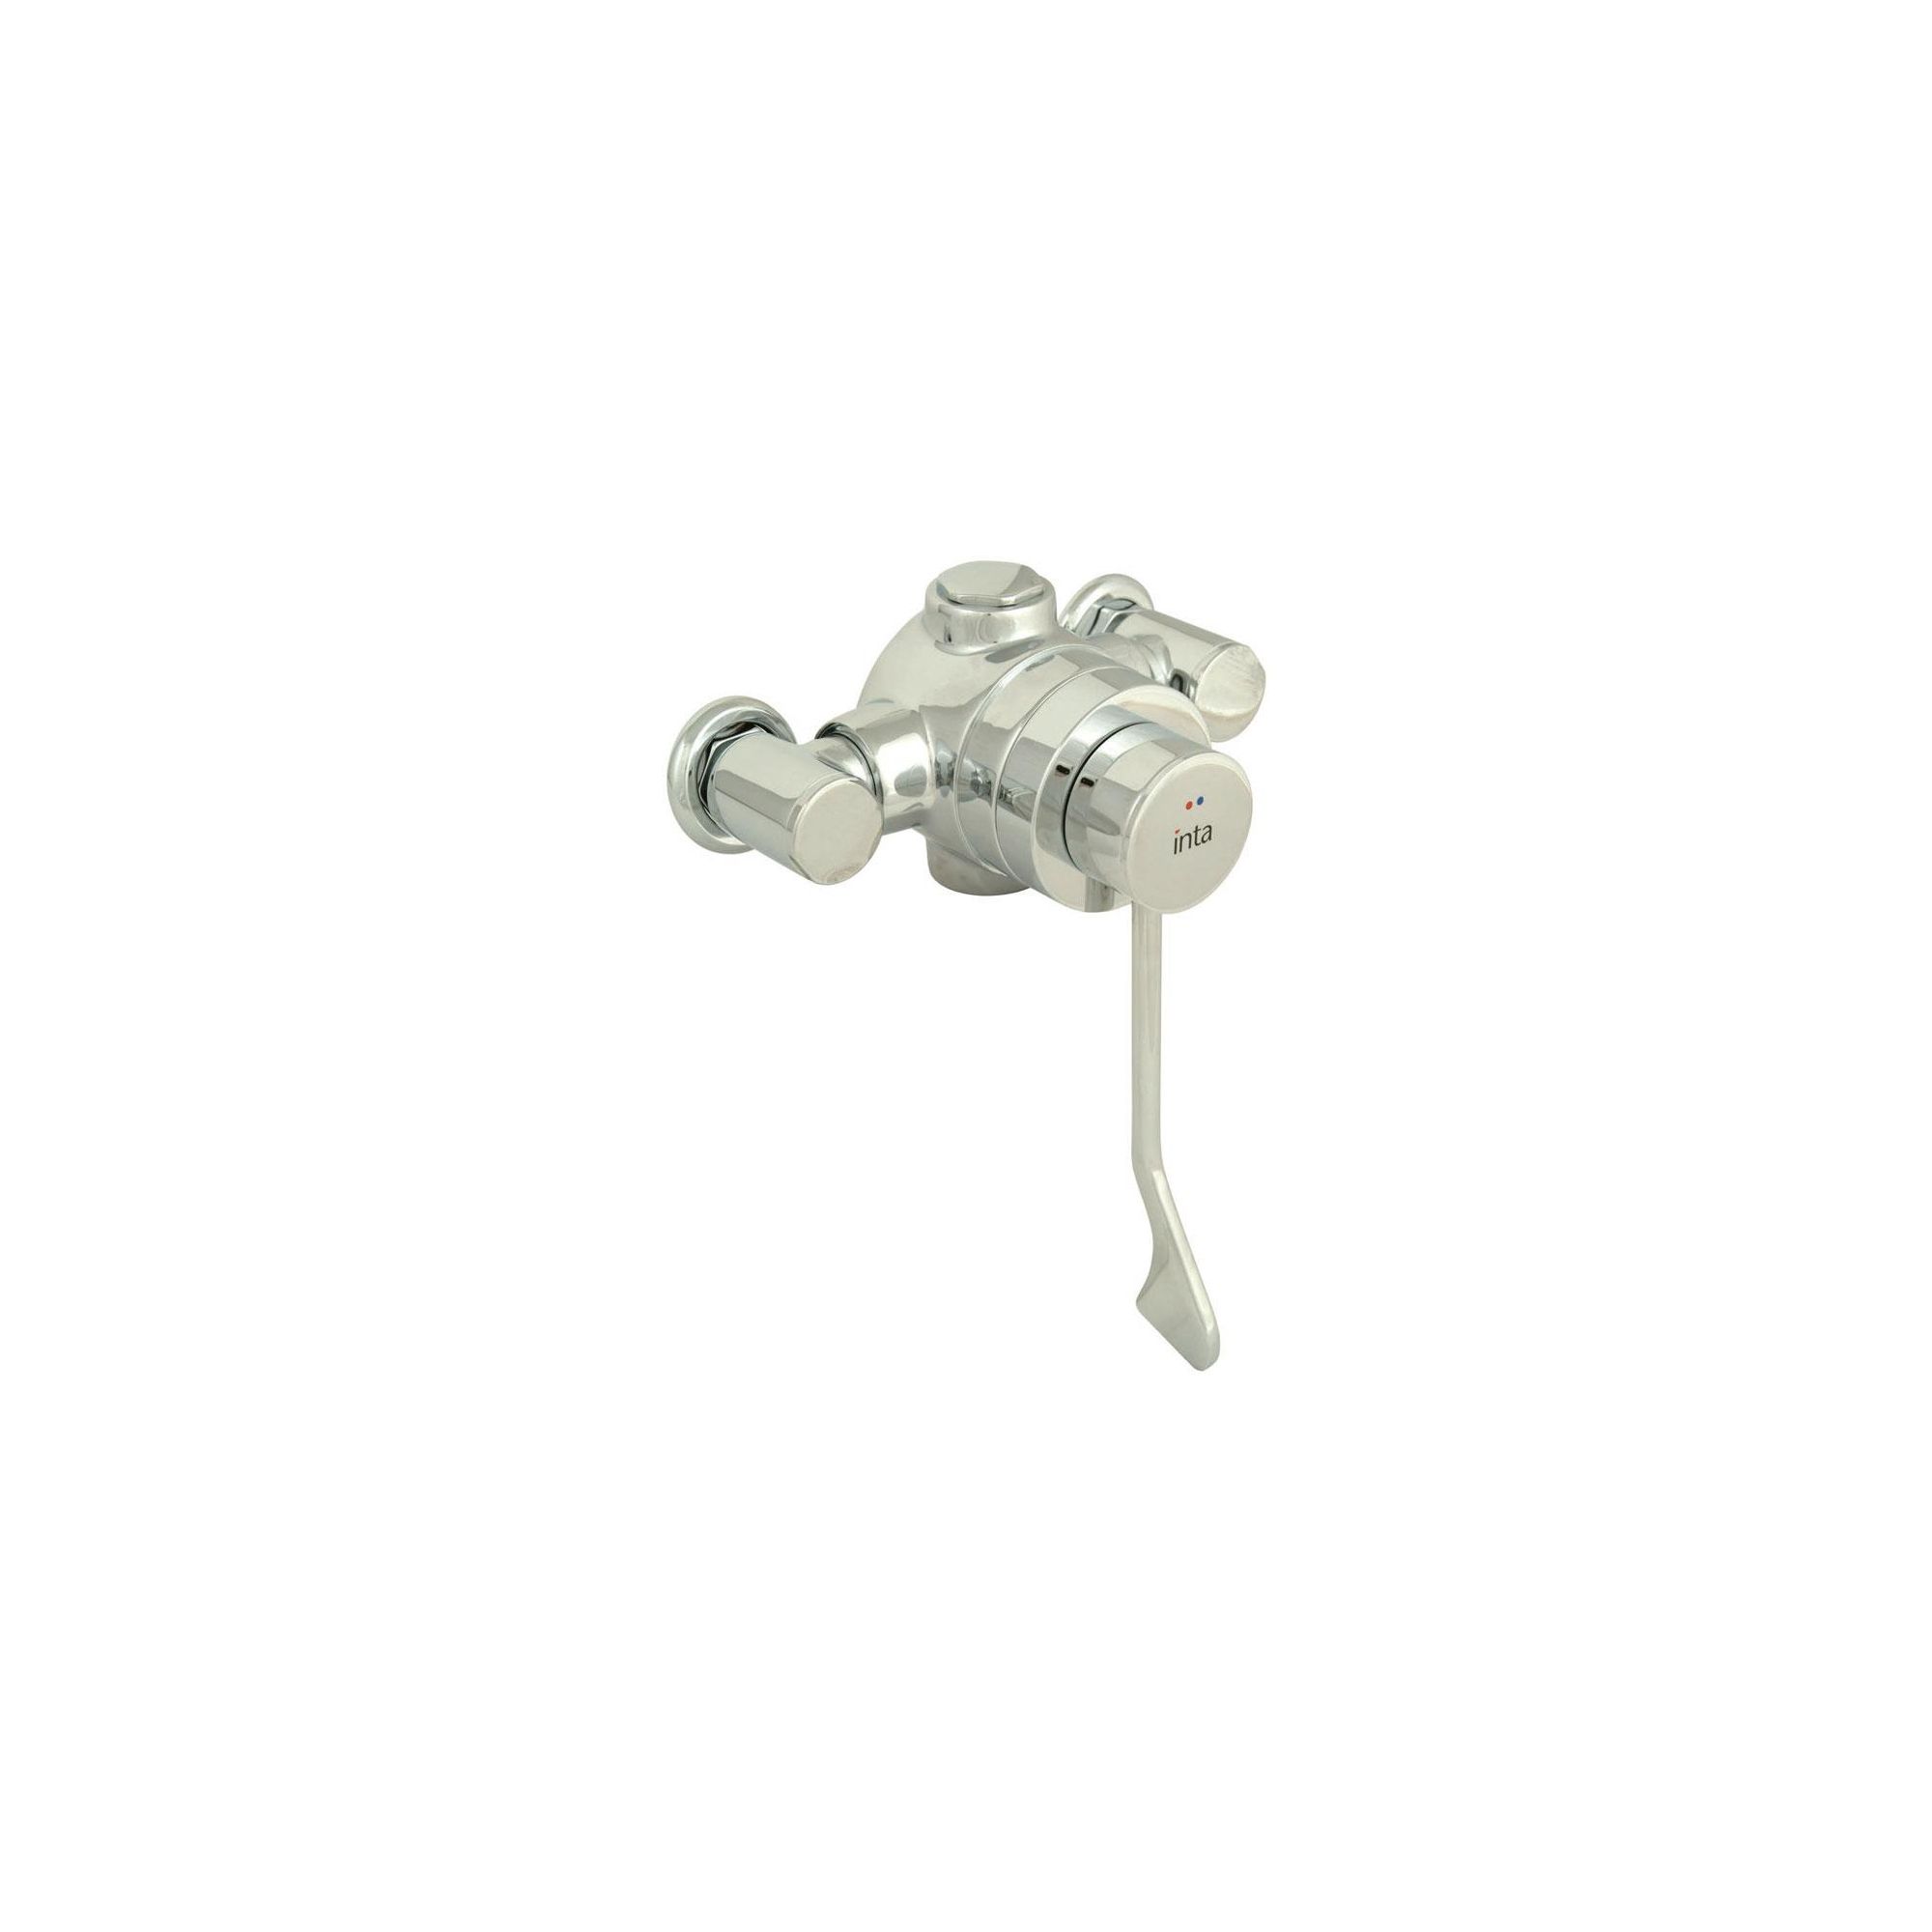 Inta Minimalistic Exposed Sequential Shower Valve with Paddle at Tesco Direct